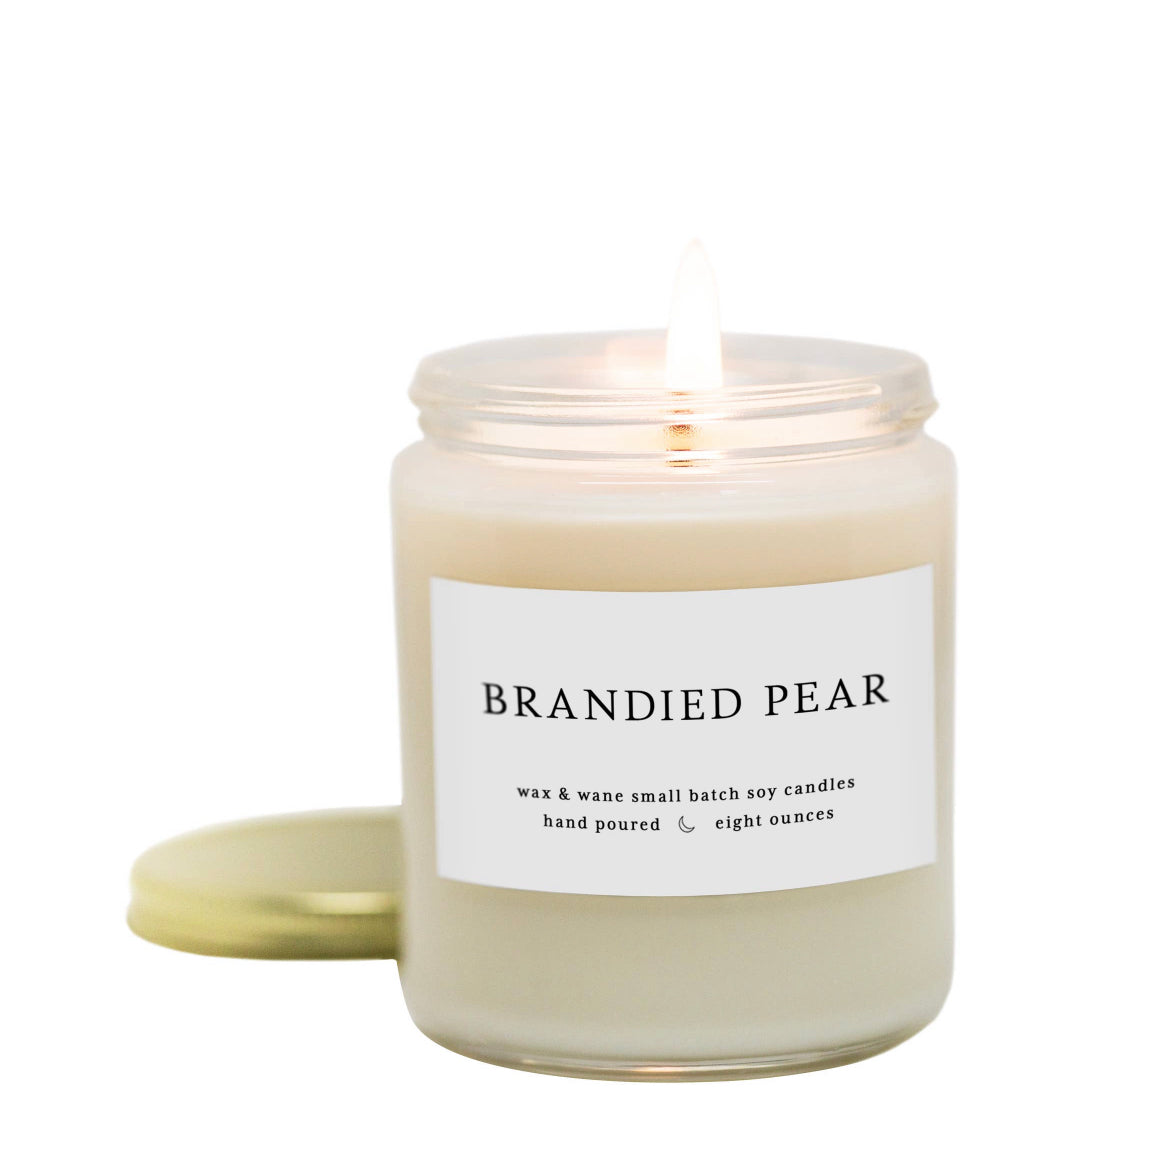 Brandied Pear Modern Soy Candle